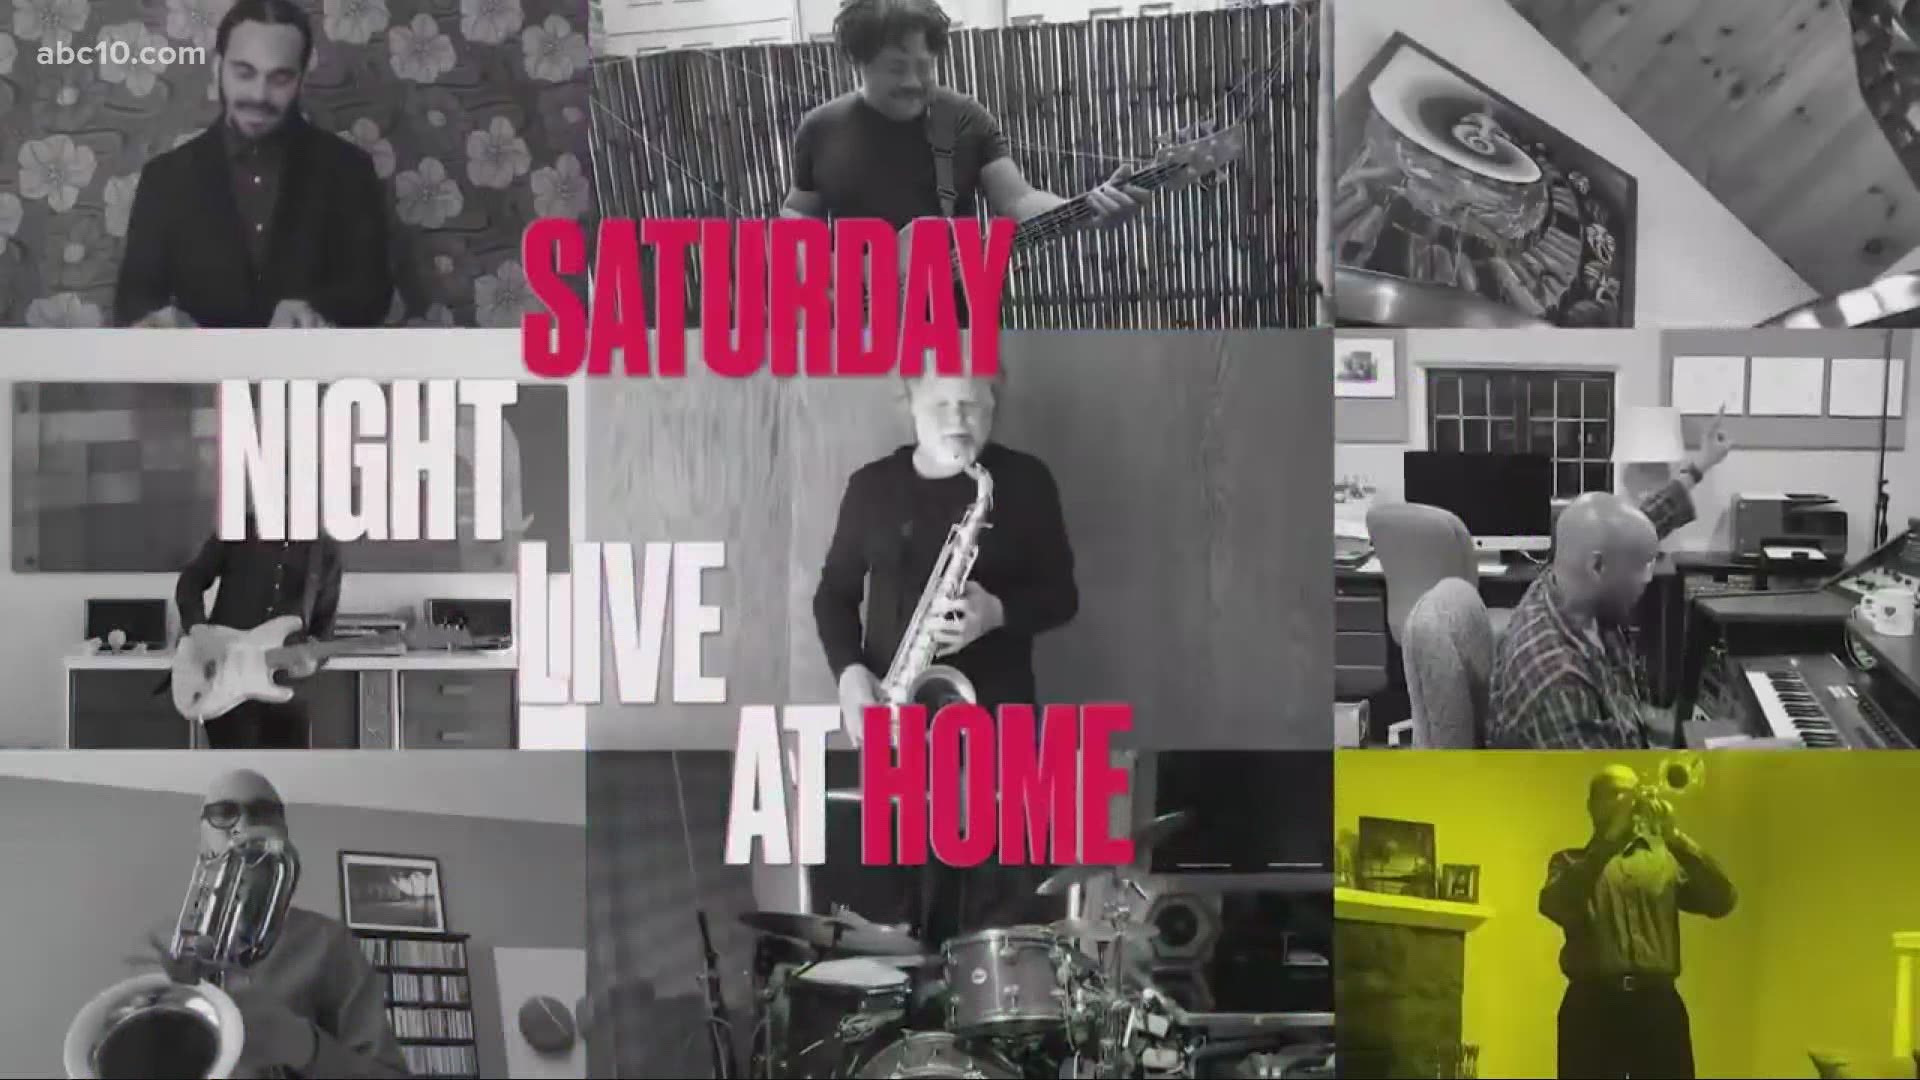 In today's entertainment news roundup, Saturday Night Live held a remote episode due to the coronavirus pandemic and 35 years ago today 'We Are The World' debuted.